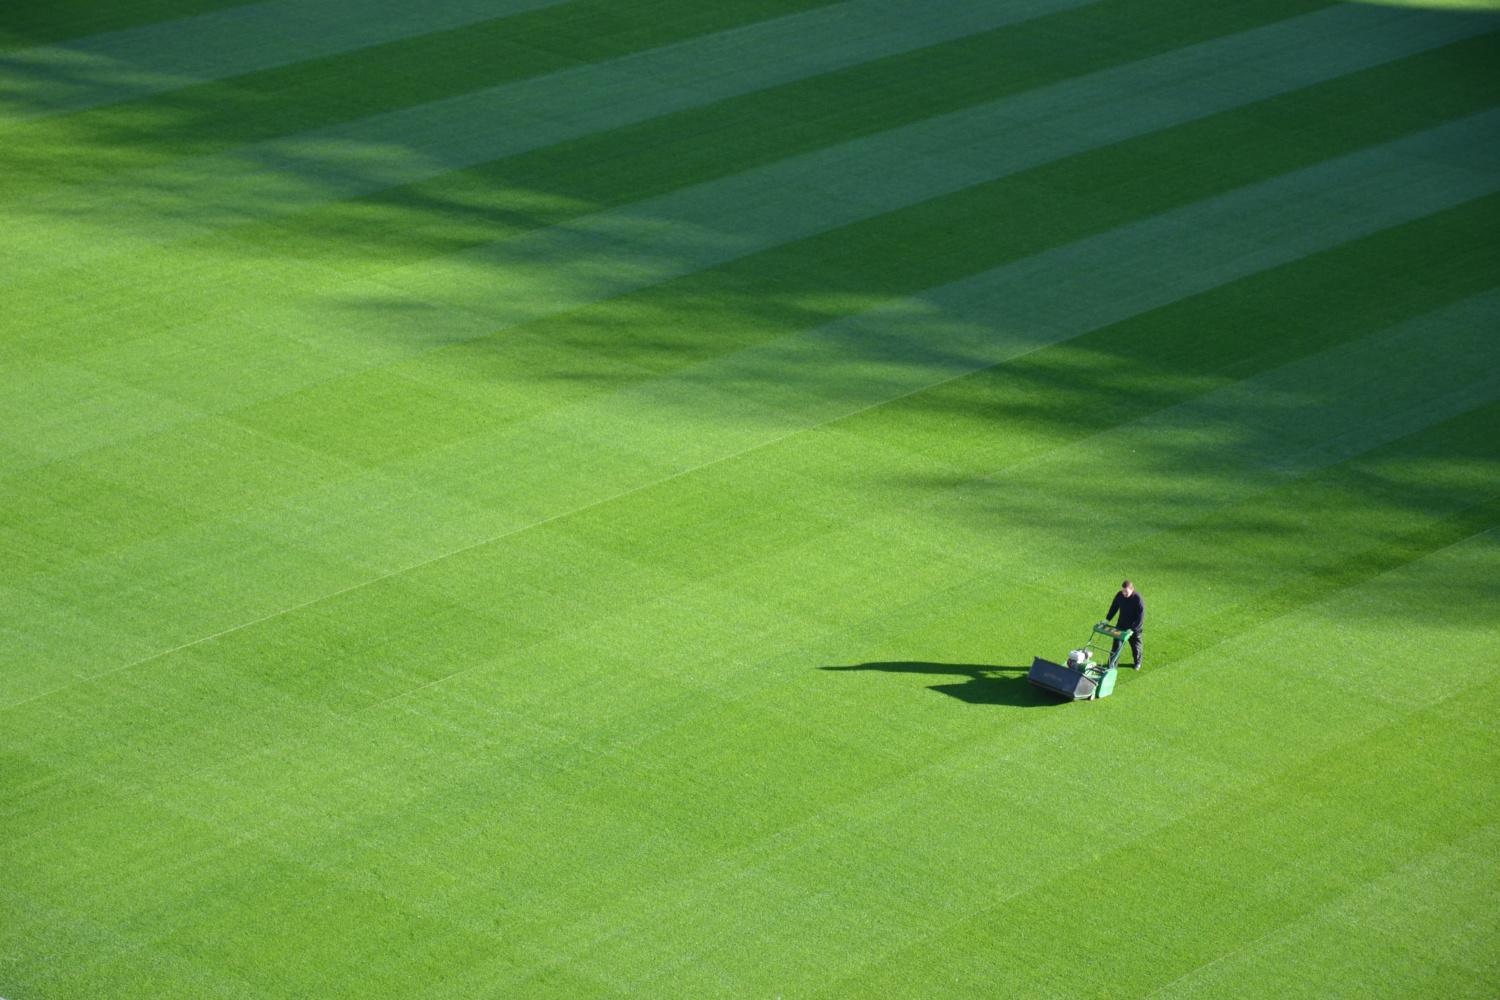 Man mowing a chequer board pattern into a lawn